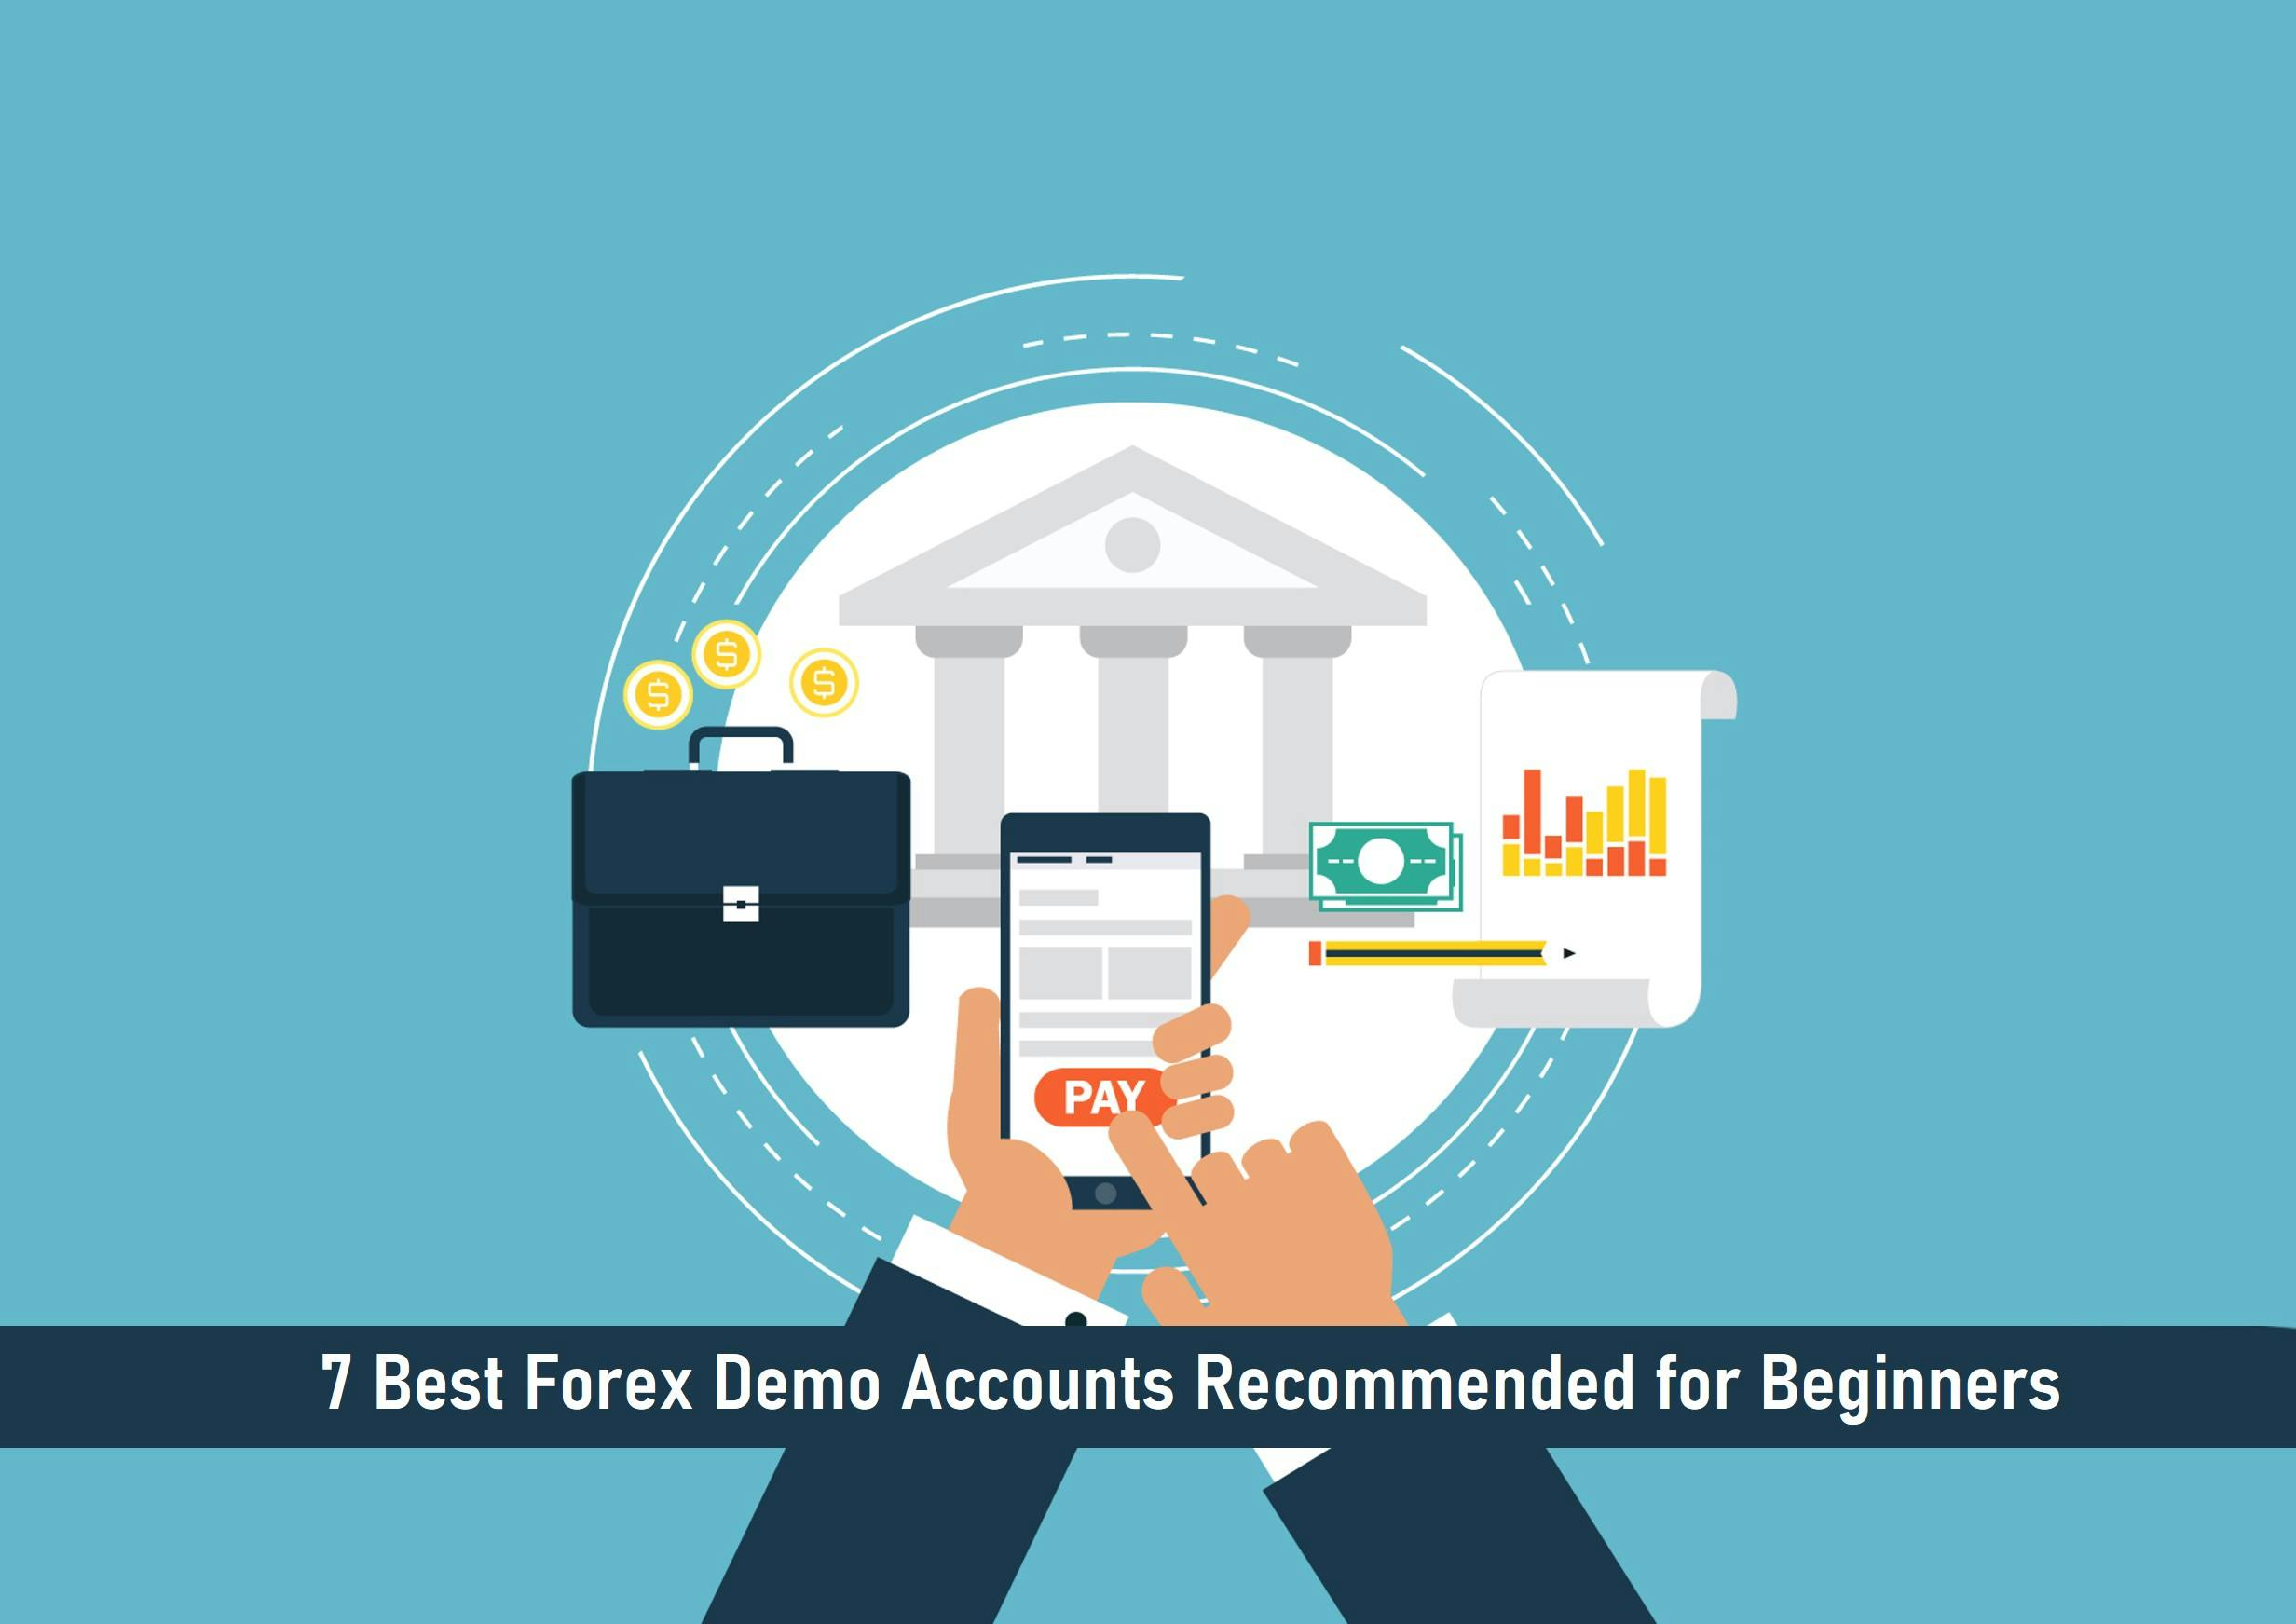 7 Best Forex Demo Accounts Recommended for Beginners